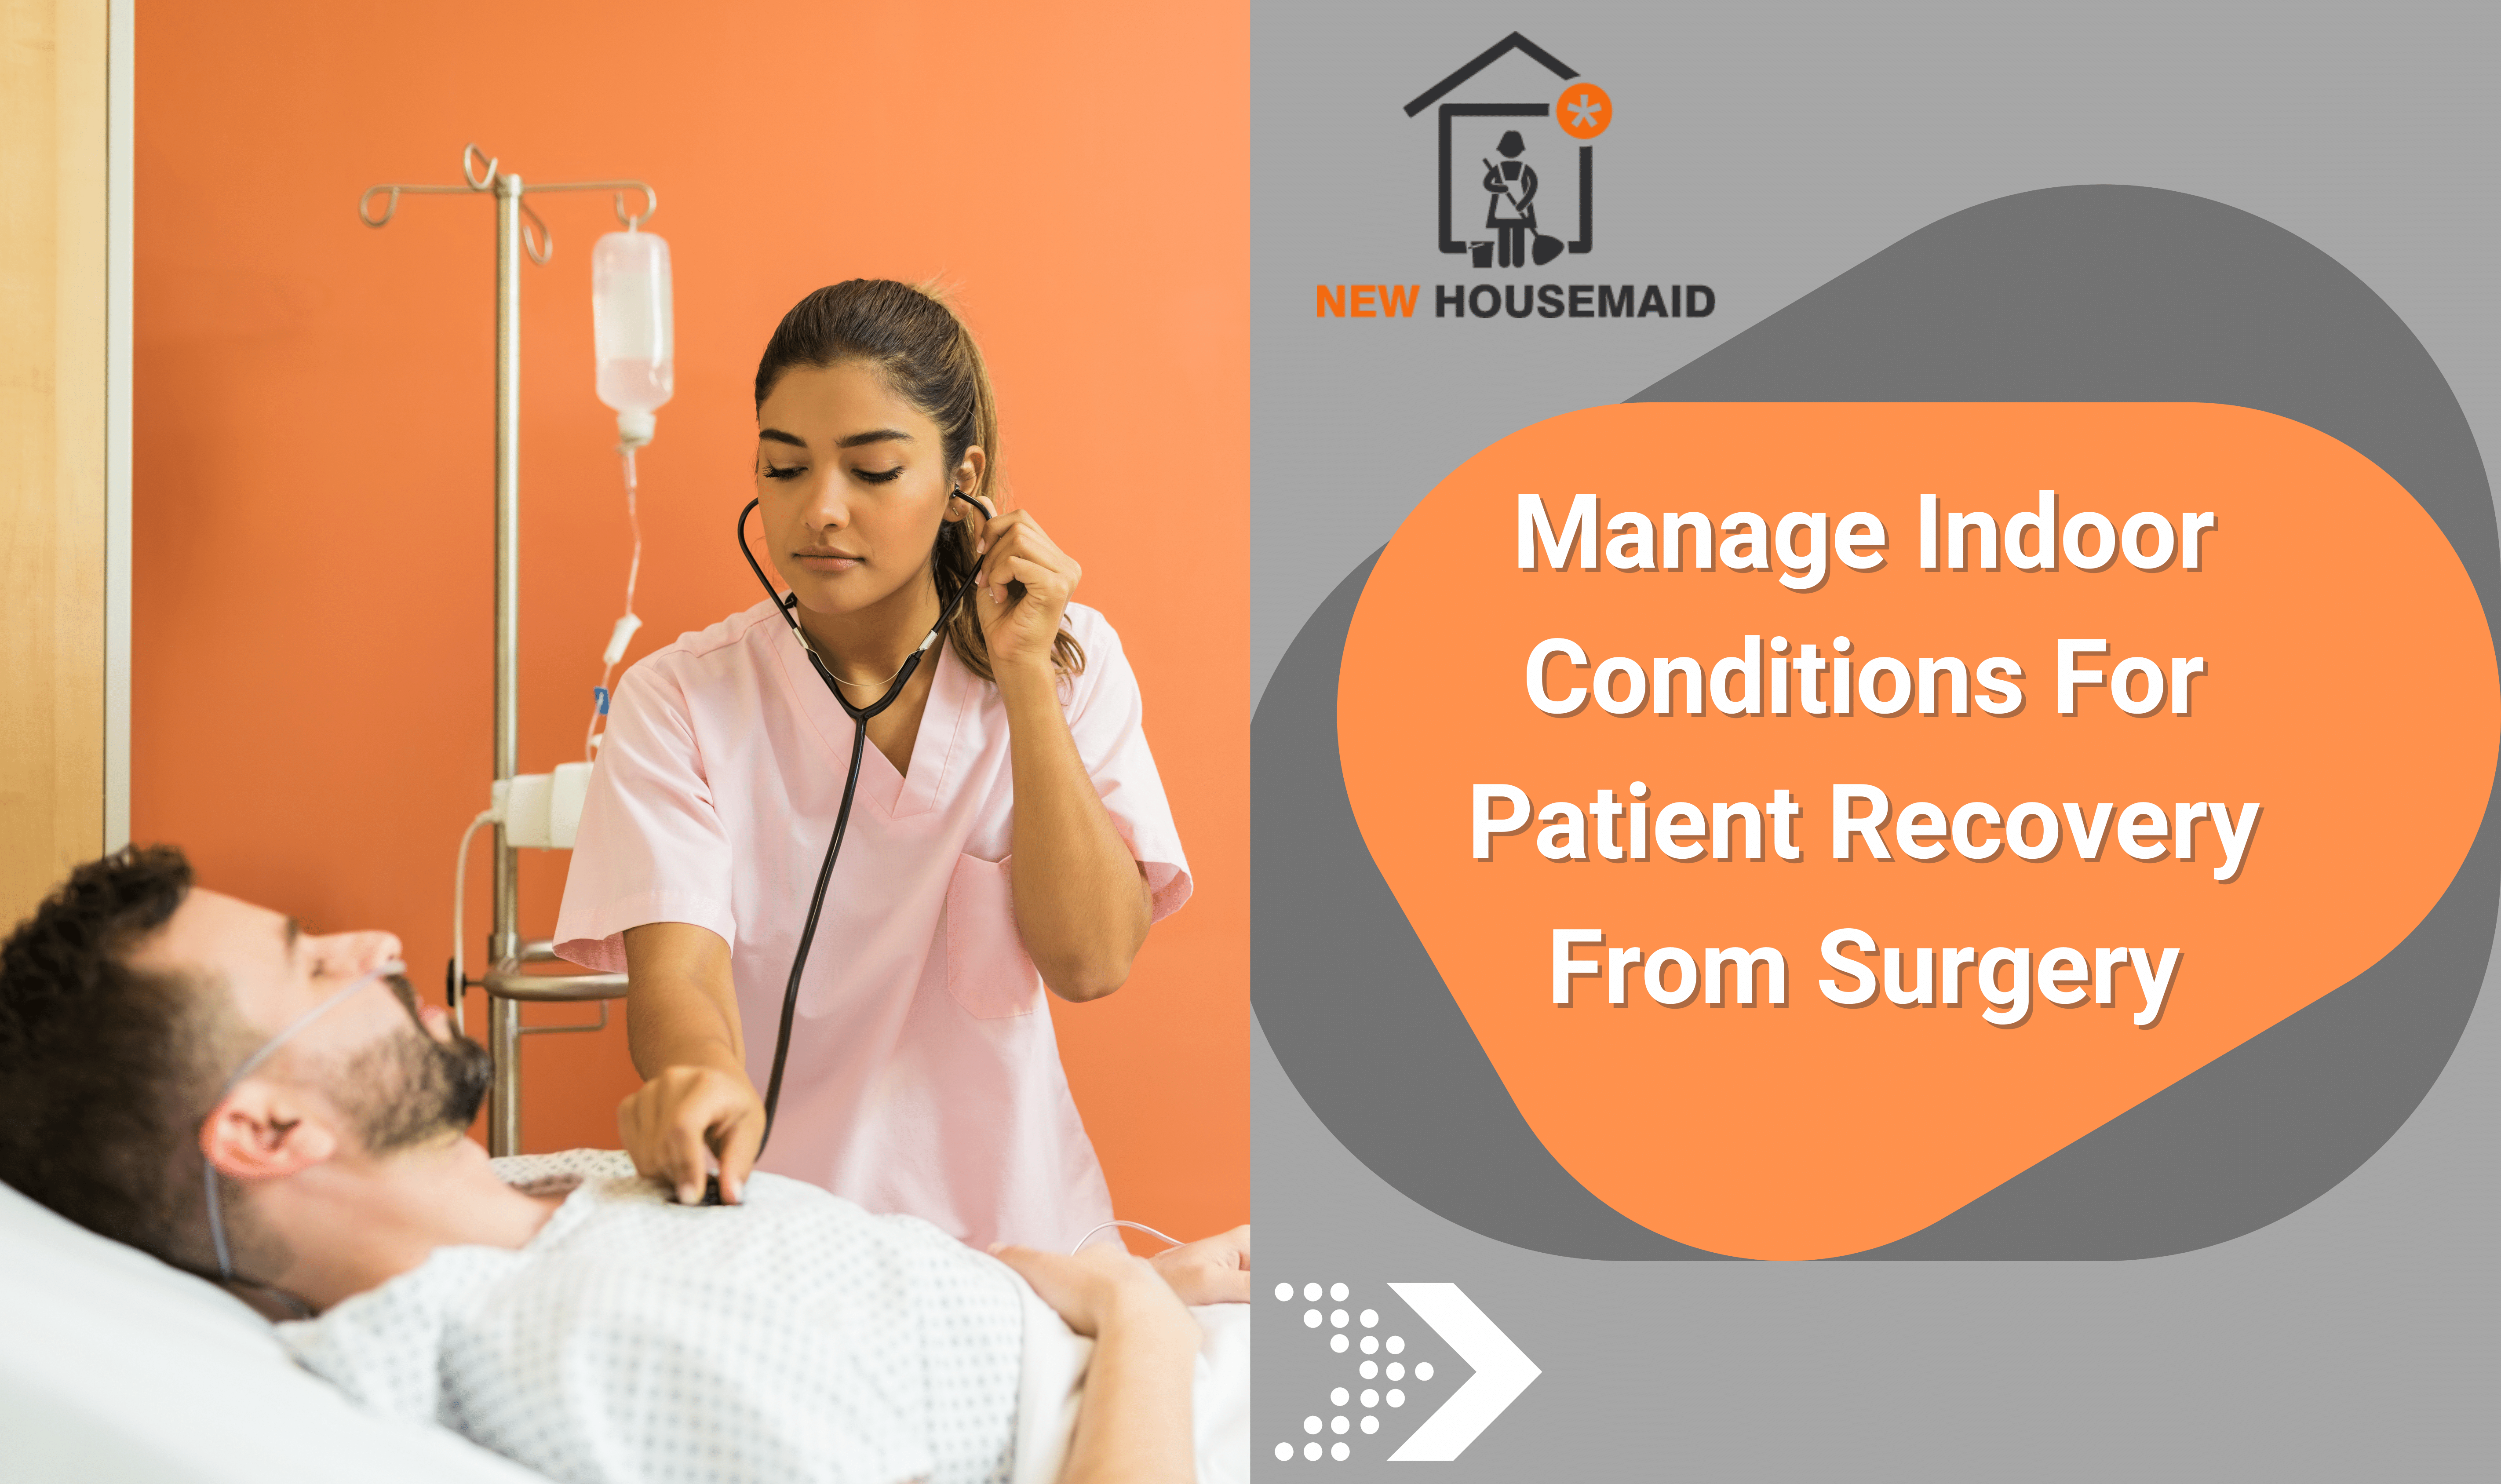 How to Manage Indoor Conditions for Patients Recovering From Surgery